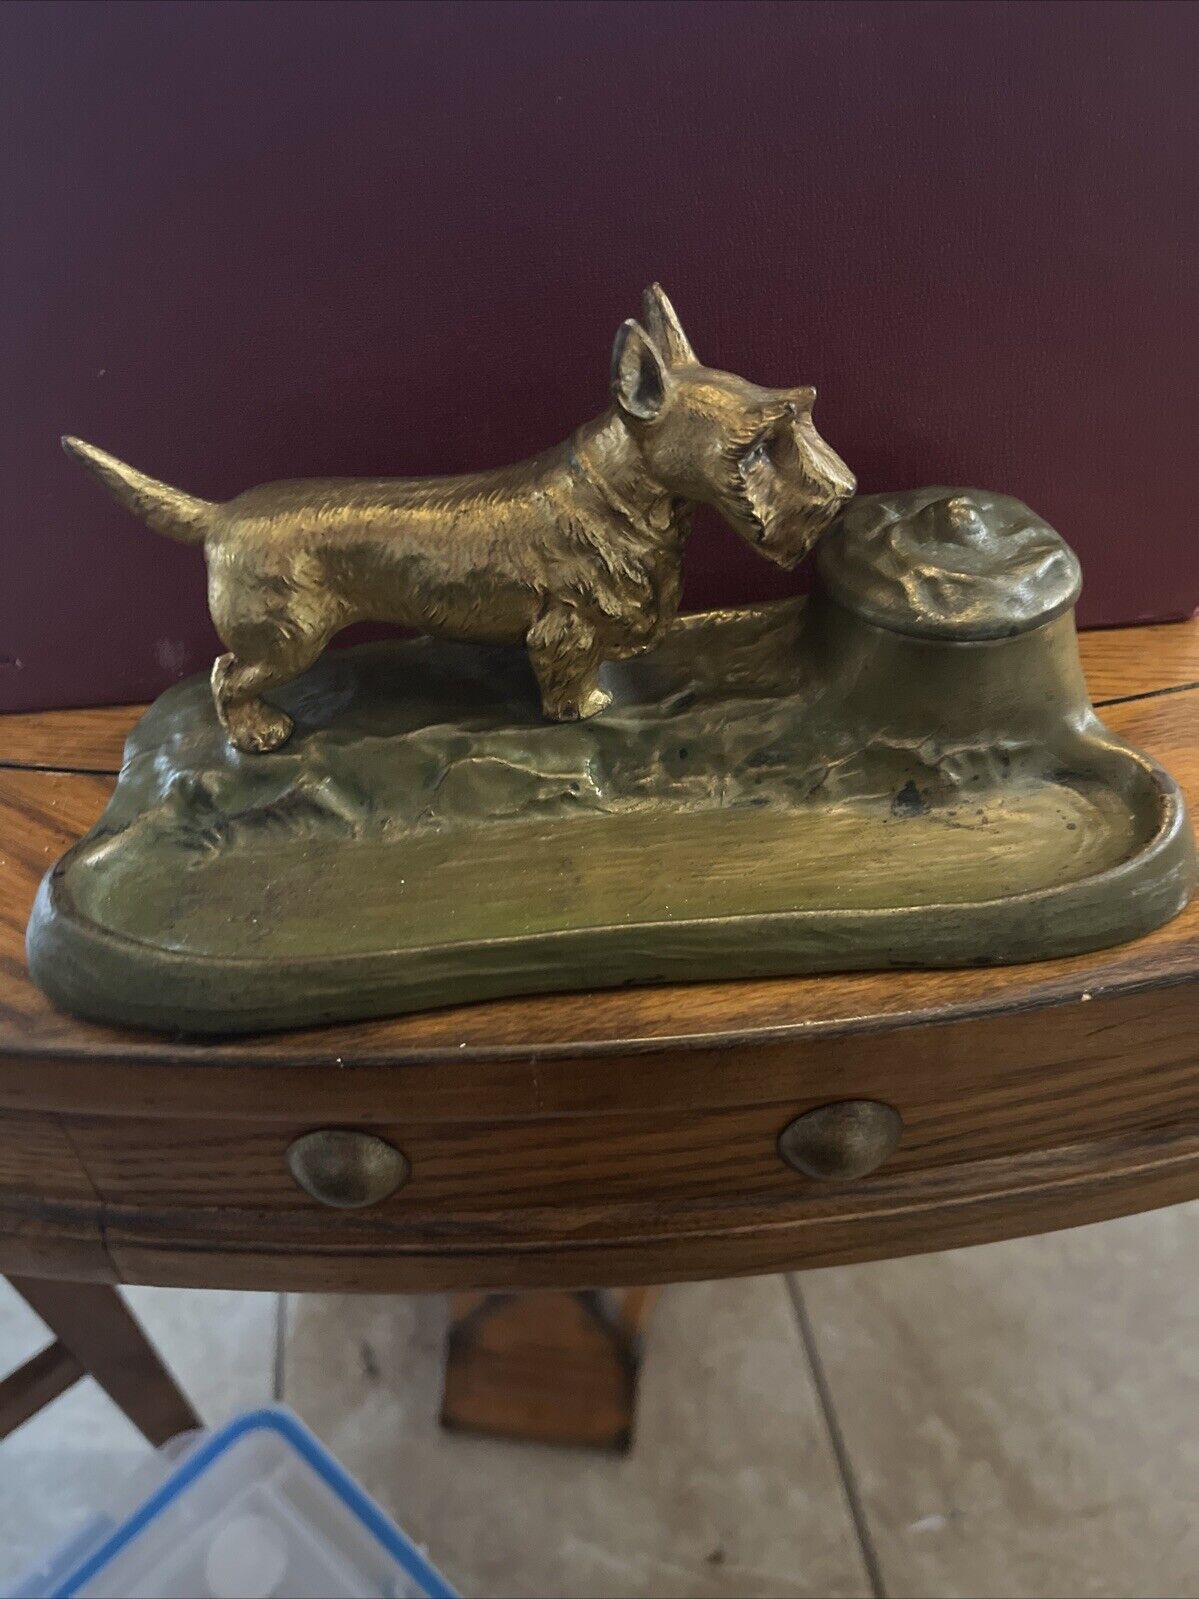 fountain pen inkwell With Dog And Toilet